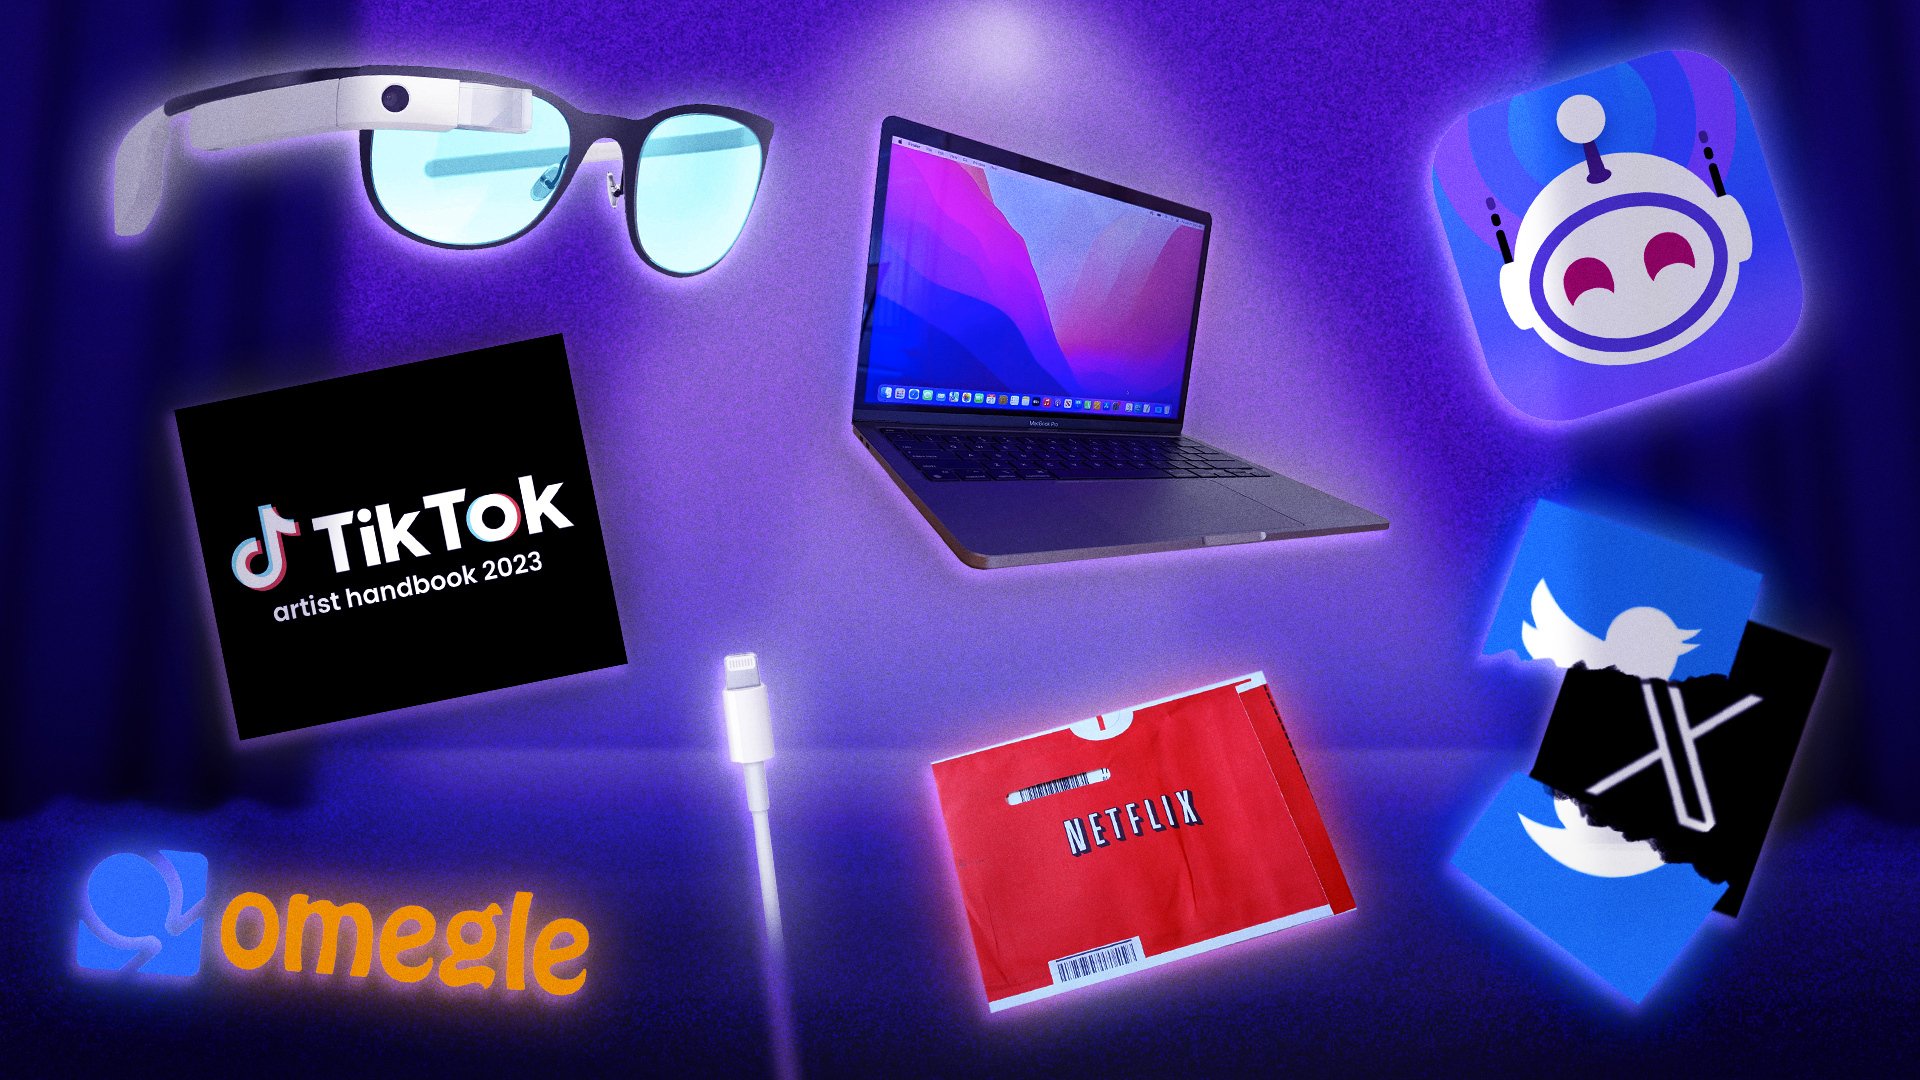 Google Glass, the 13-inch MacBook Pro, the Apollo logo, the Twitter and X logos, a Netflix red DVD envelope, a Lightning cable, the Omegle logo, and the TikTok logo against the backdrop of a purple stage with a spotlight 